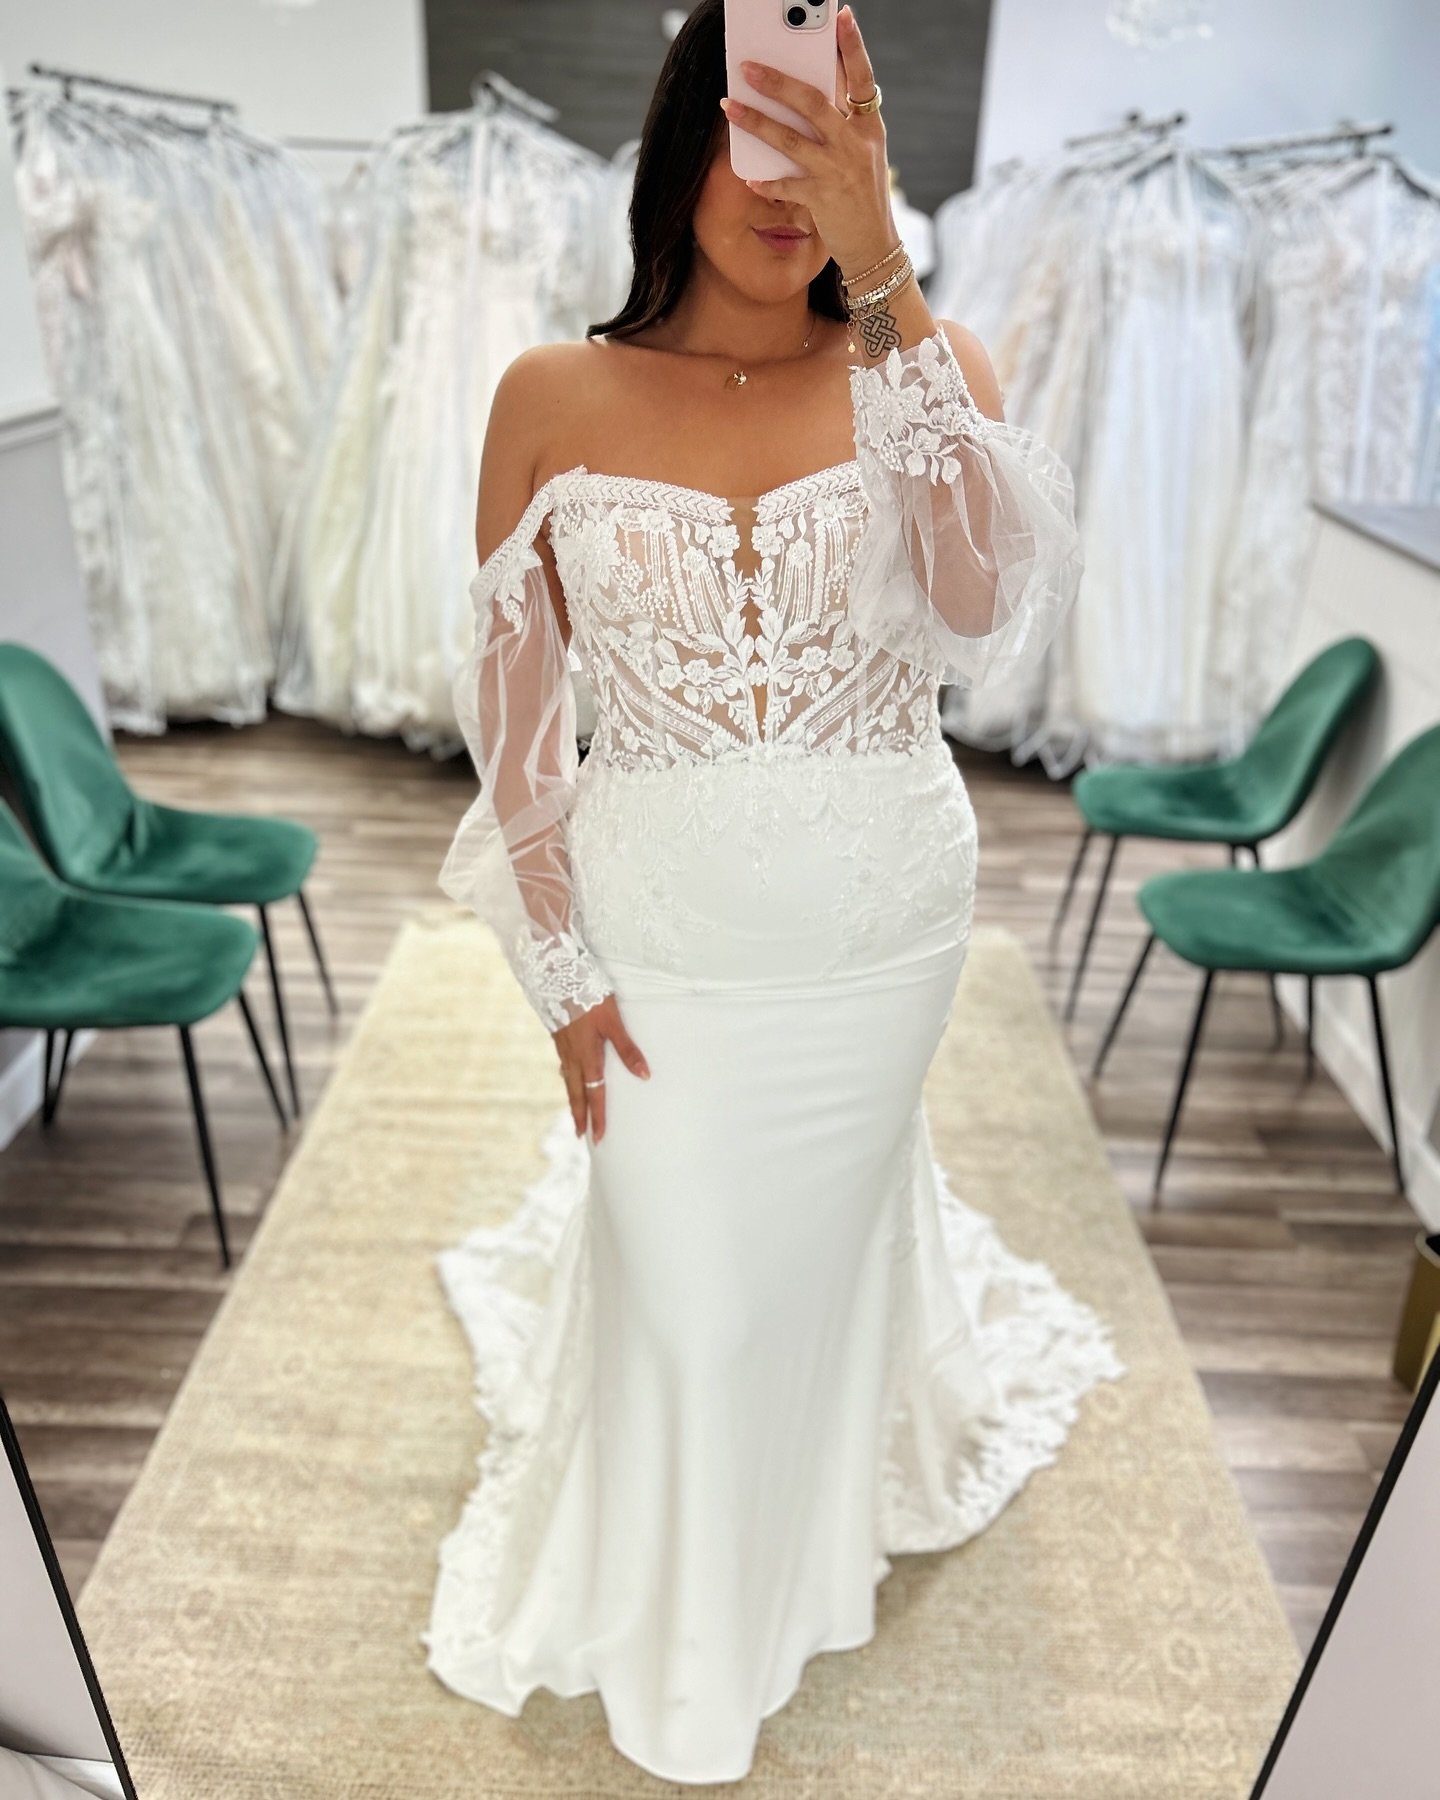 We are in love with this weeks #TryOnTuesday 

This gorgeous crepe gown is part of our Private Label Emilia Leray! Our Private Label gowns are brand new and give brides the opportunity to find a brand new dress in budget! 

Originally: $2,499
Now: $1